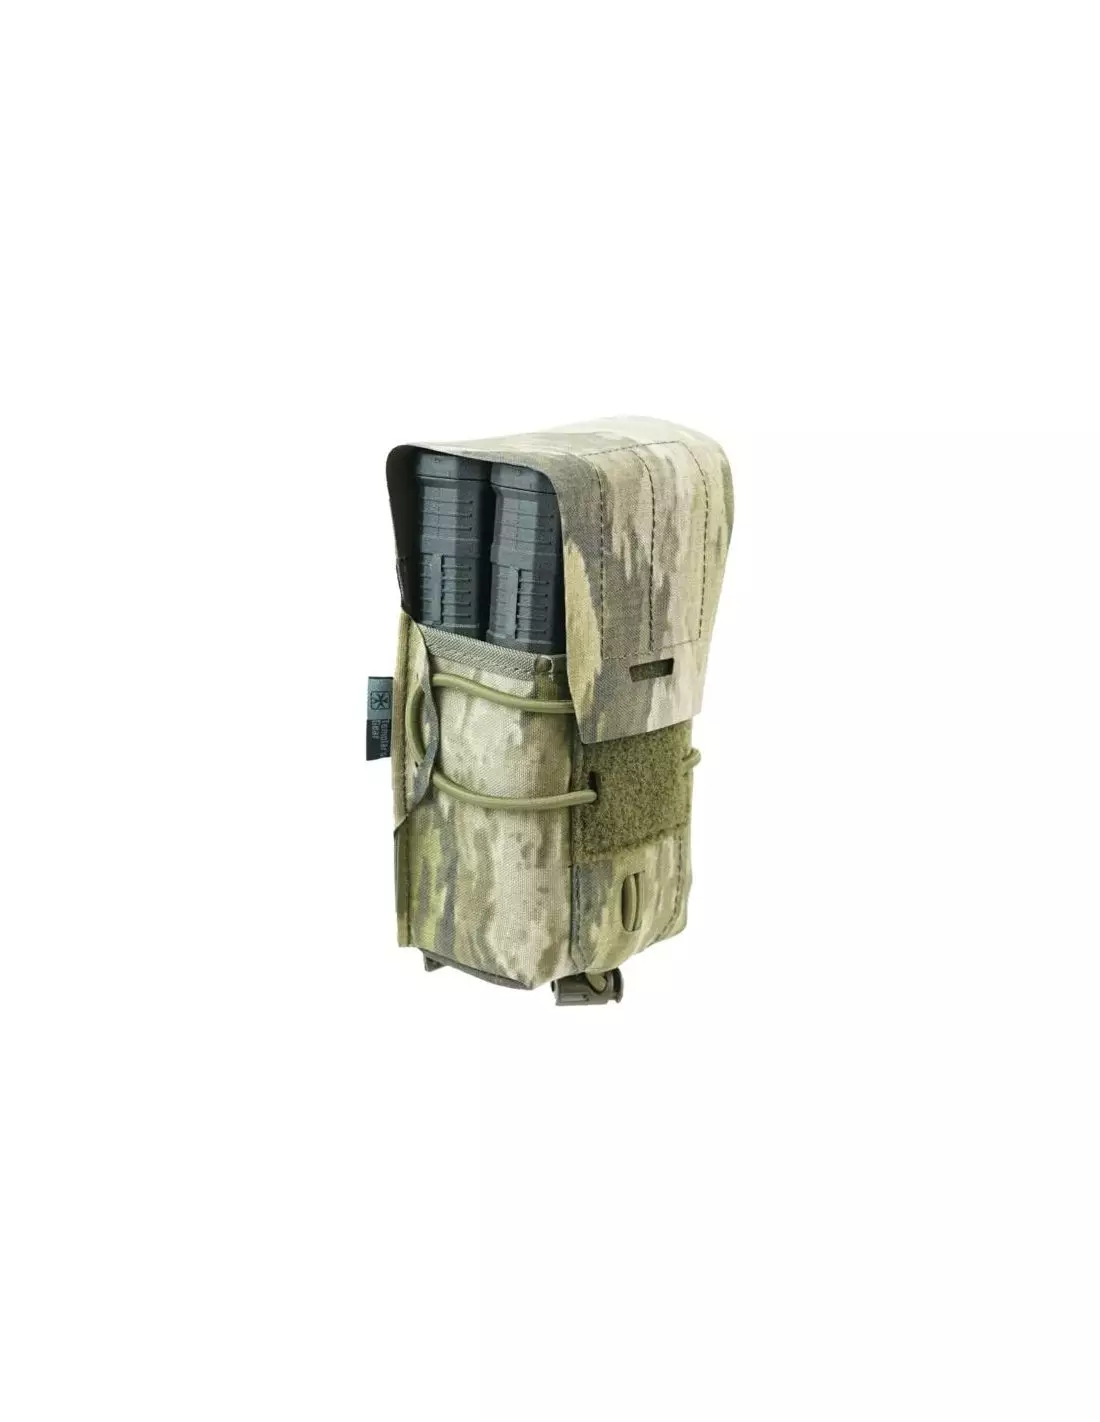 5Ive Star Gear Double Staggered Magazine Pouch with Ballistic Nylon Outer Shell